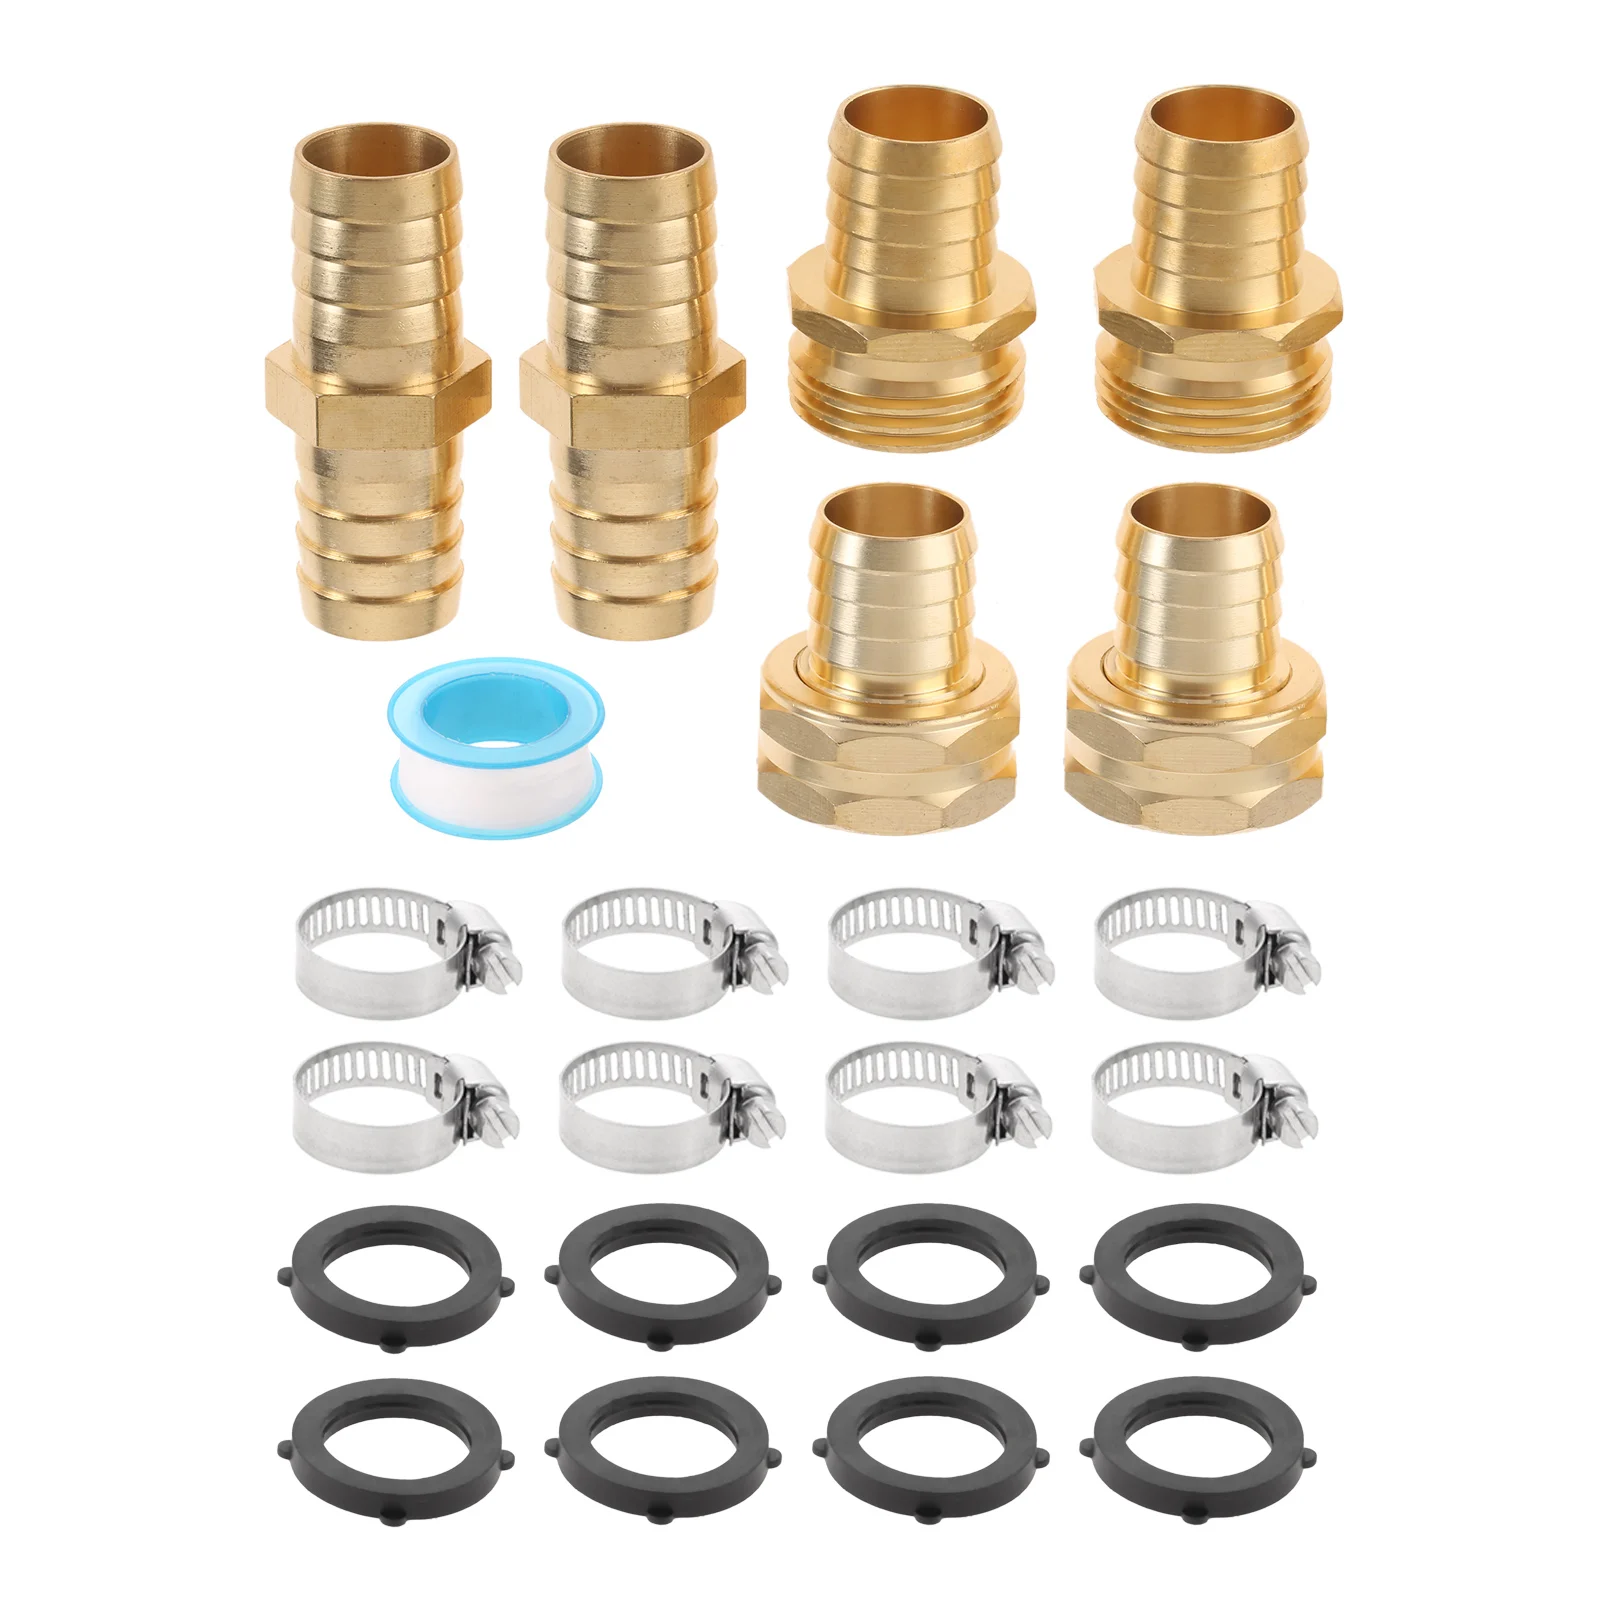 

4sets 3/4 Inch Solid Brass Garden Hose Connector Mender Water Hose Repair Female & Male Kit Tape with Steel Clamp Rubber Gasket